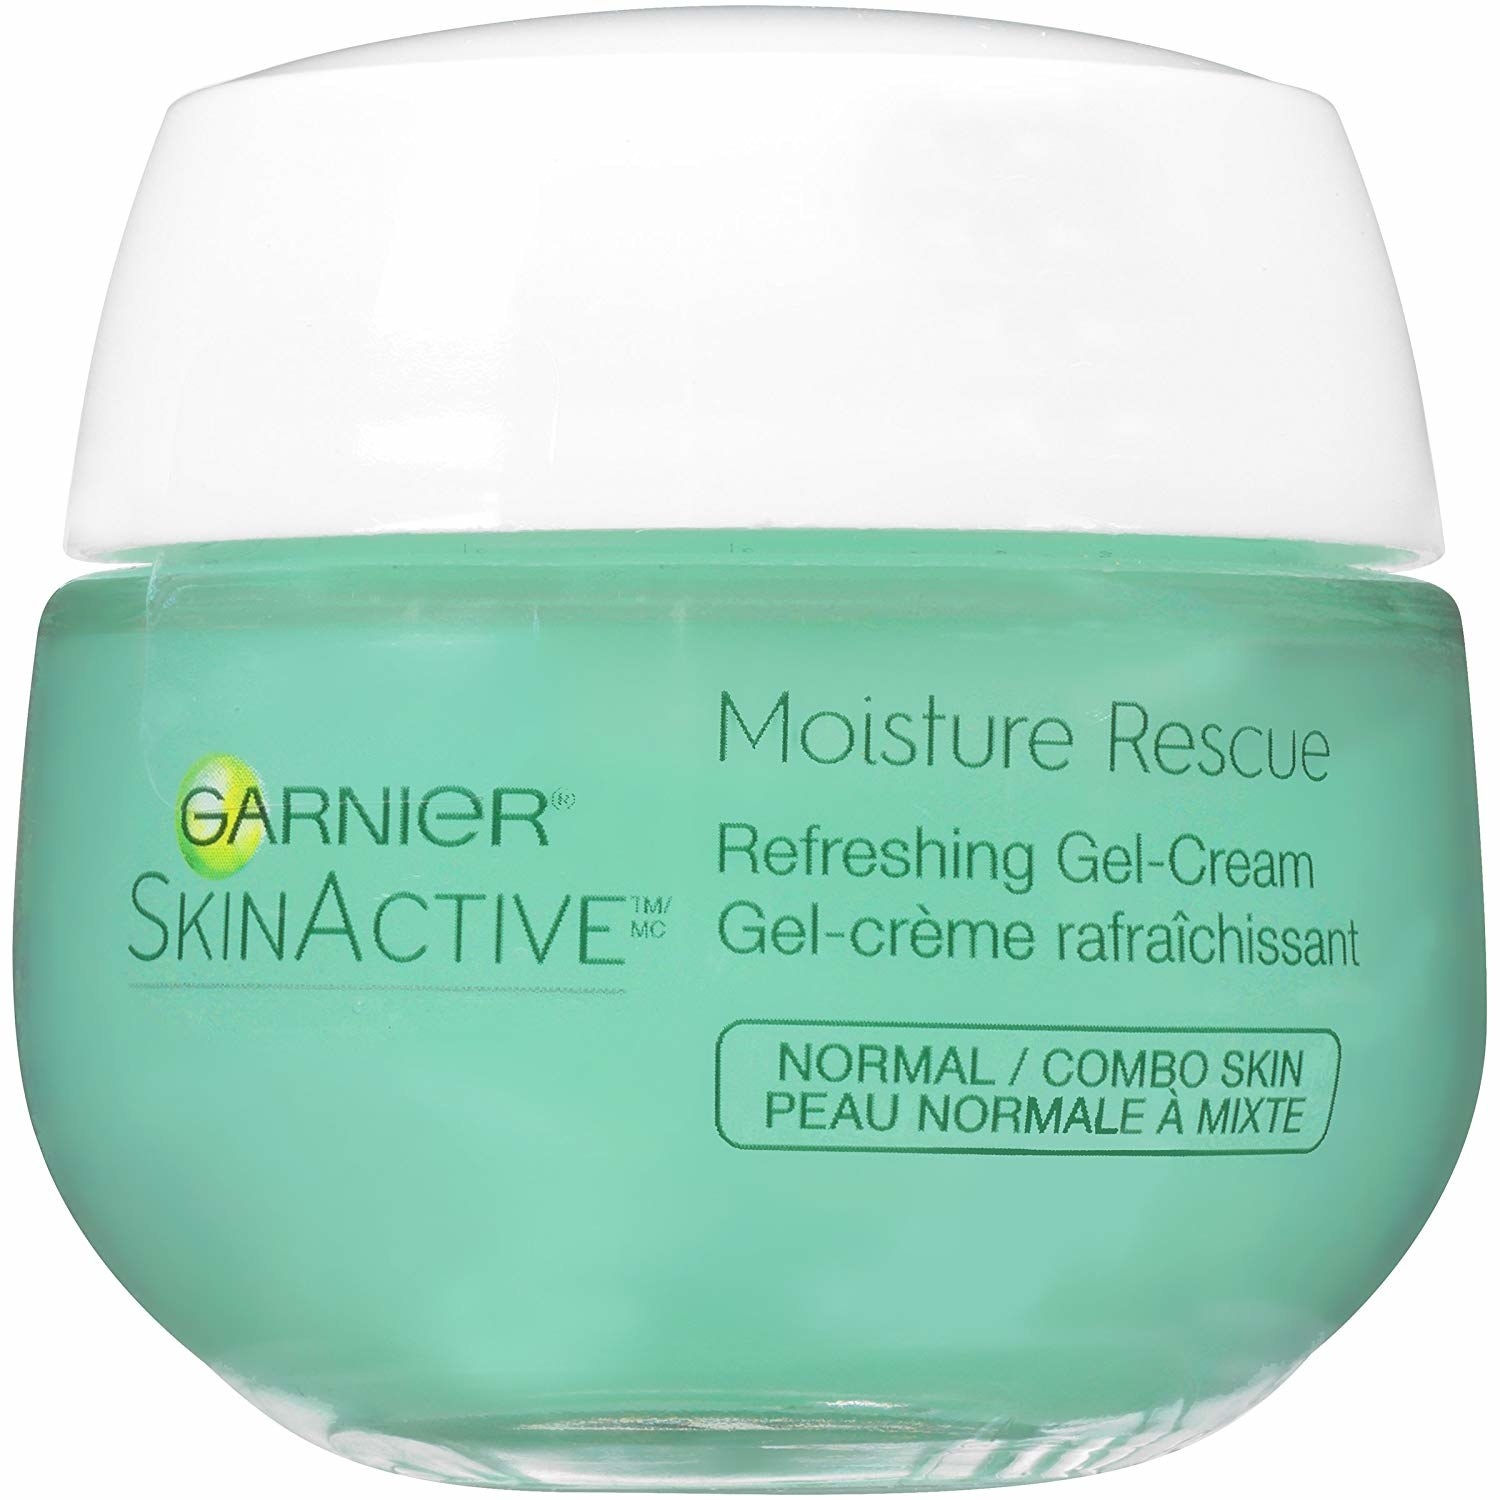 the moisturizer in a green jar with a white cap